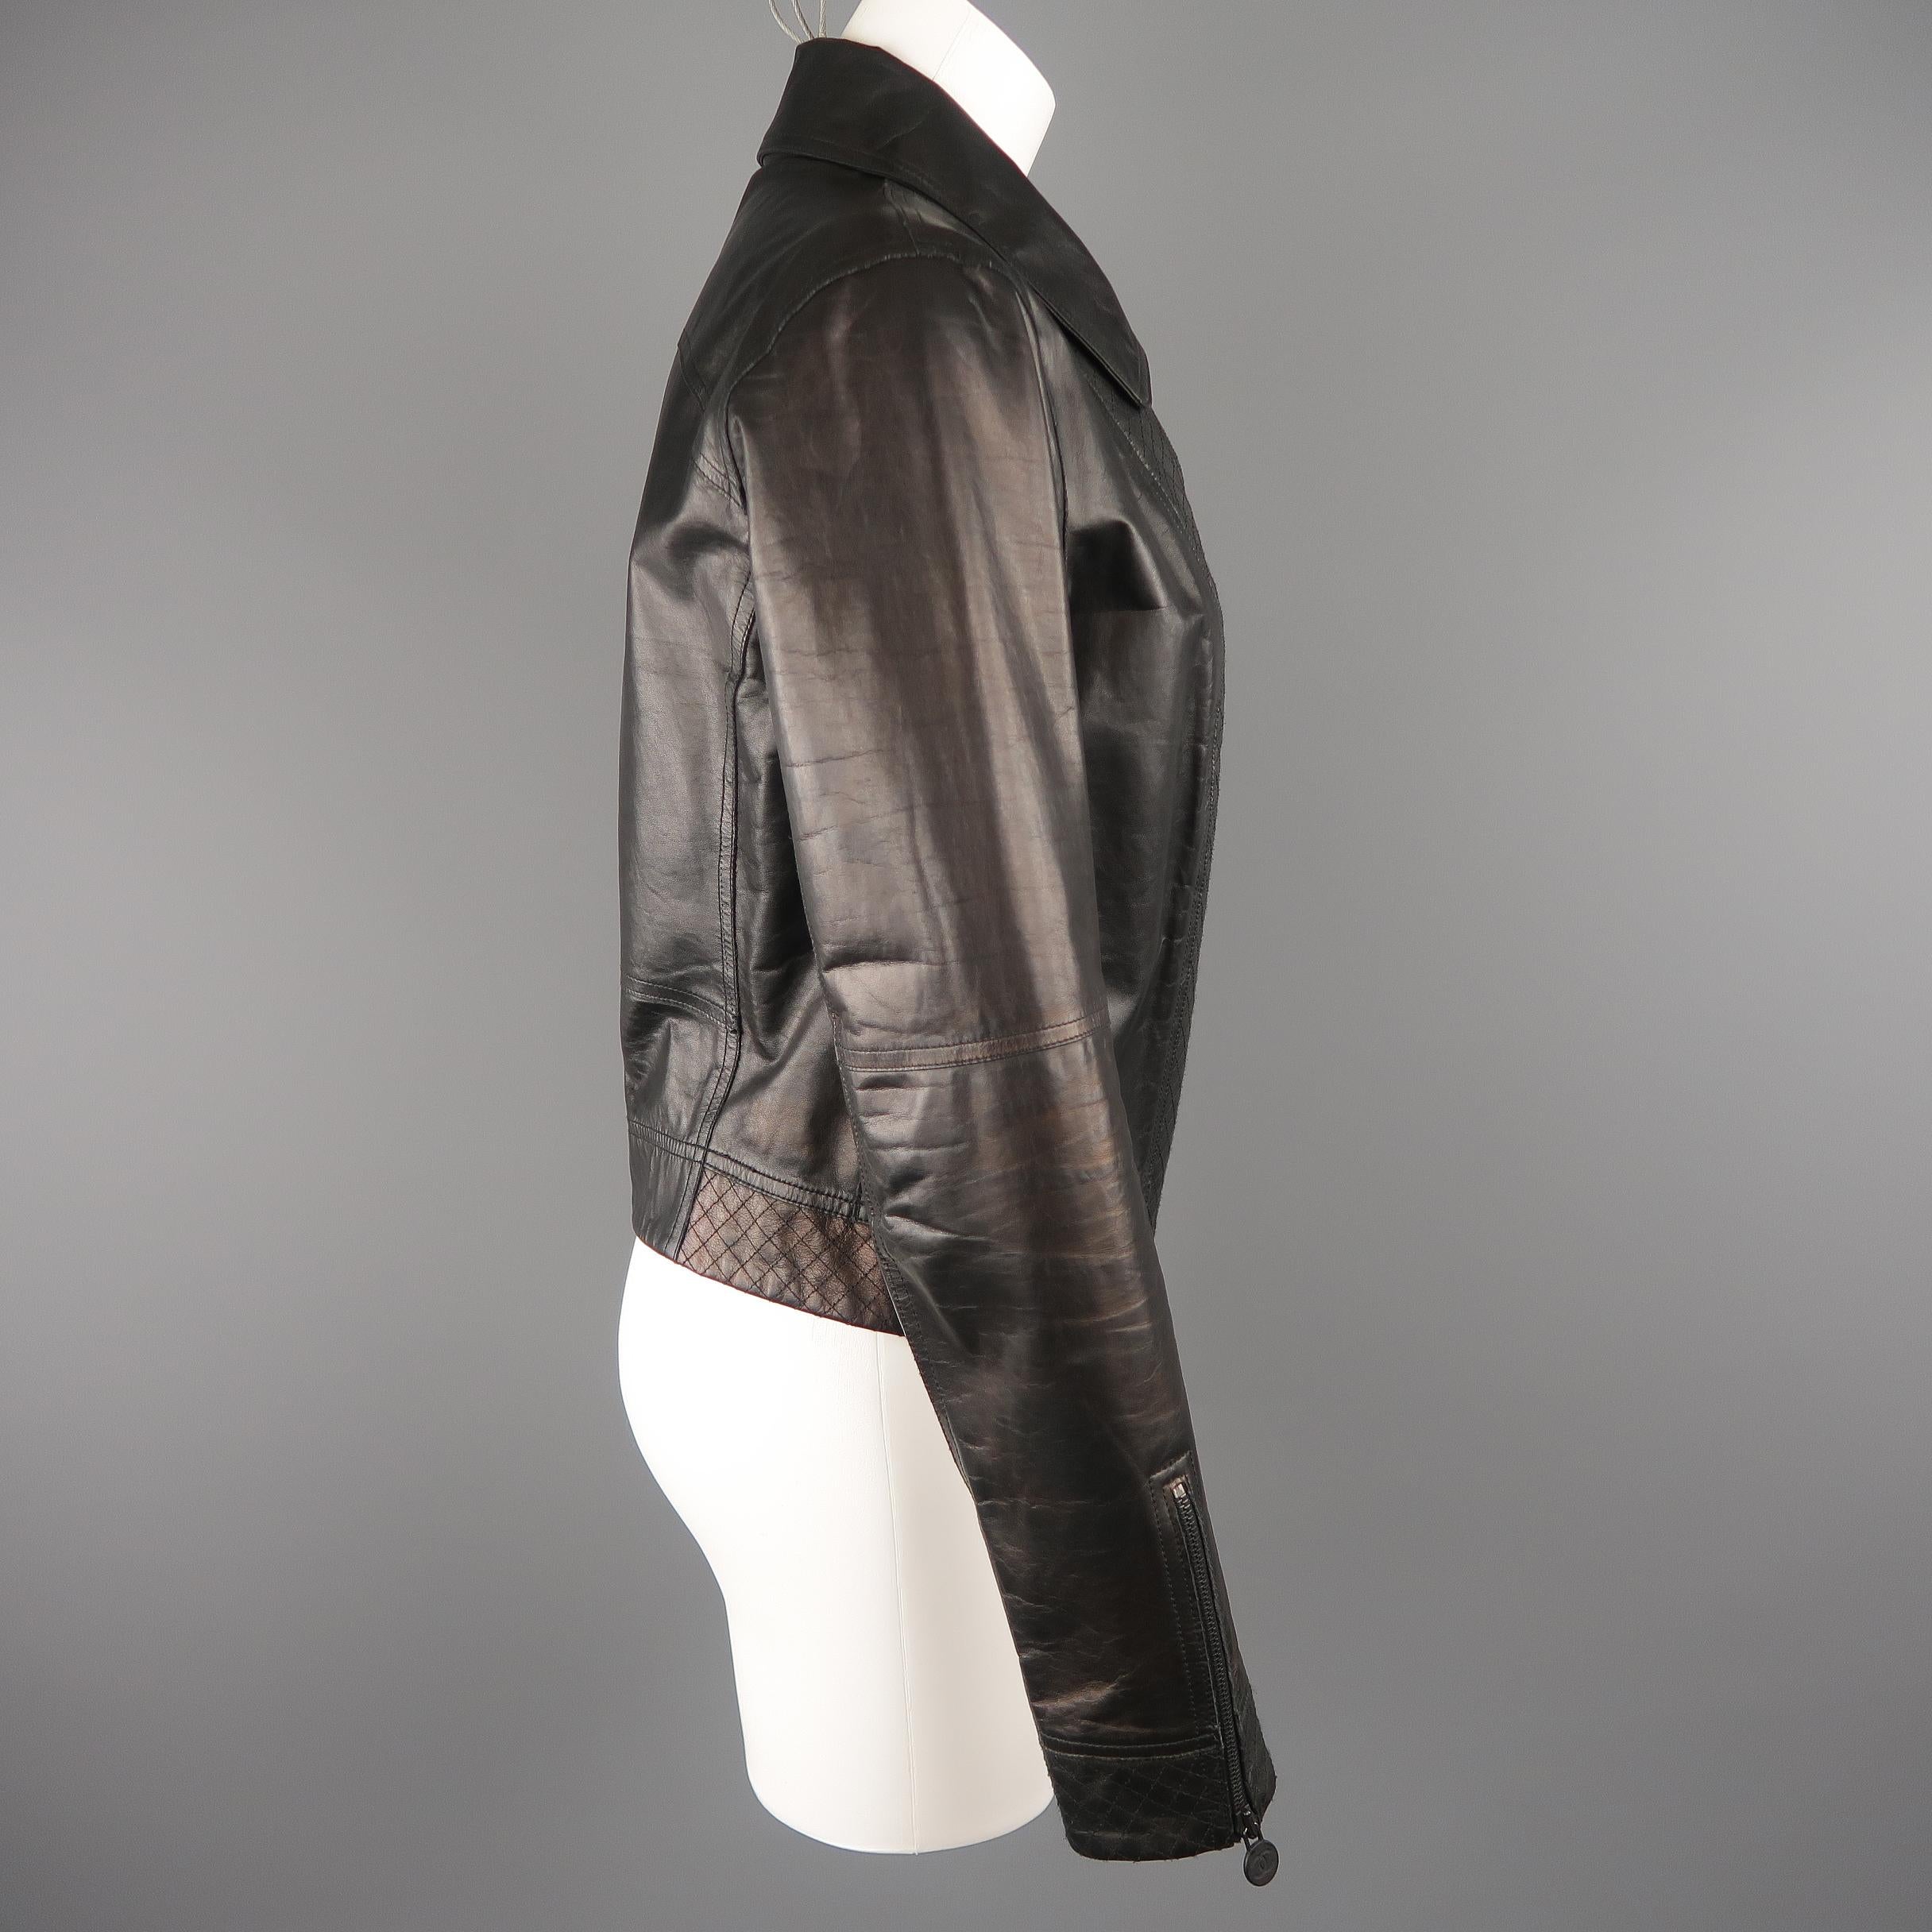 CHANEL Leather Jacket - Size 10 Black Quilted Leather CC Zip Motorcycle Jacket 2